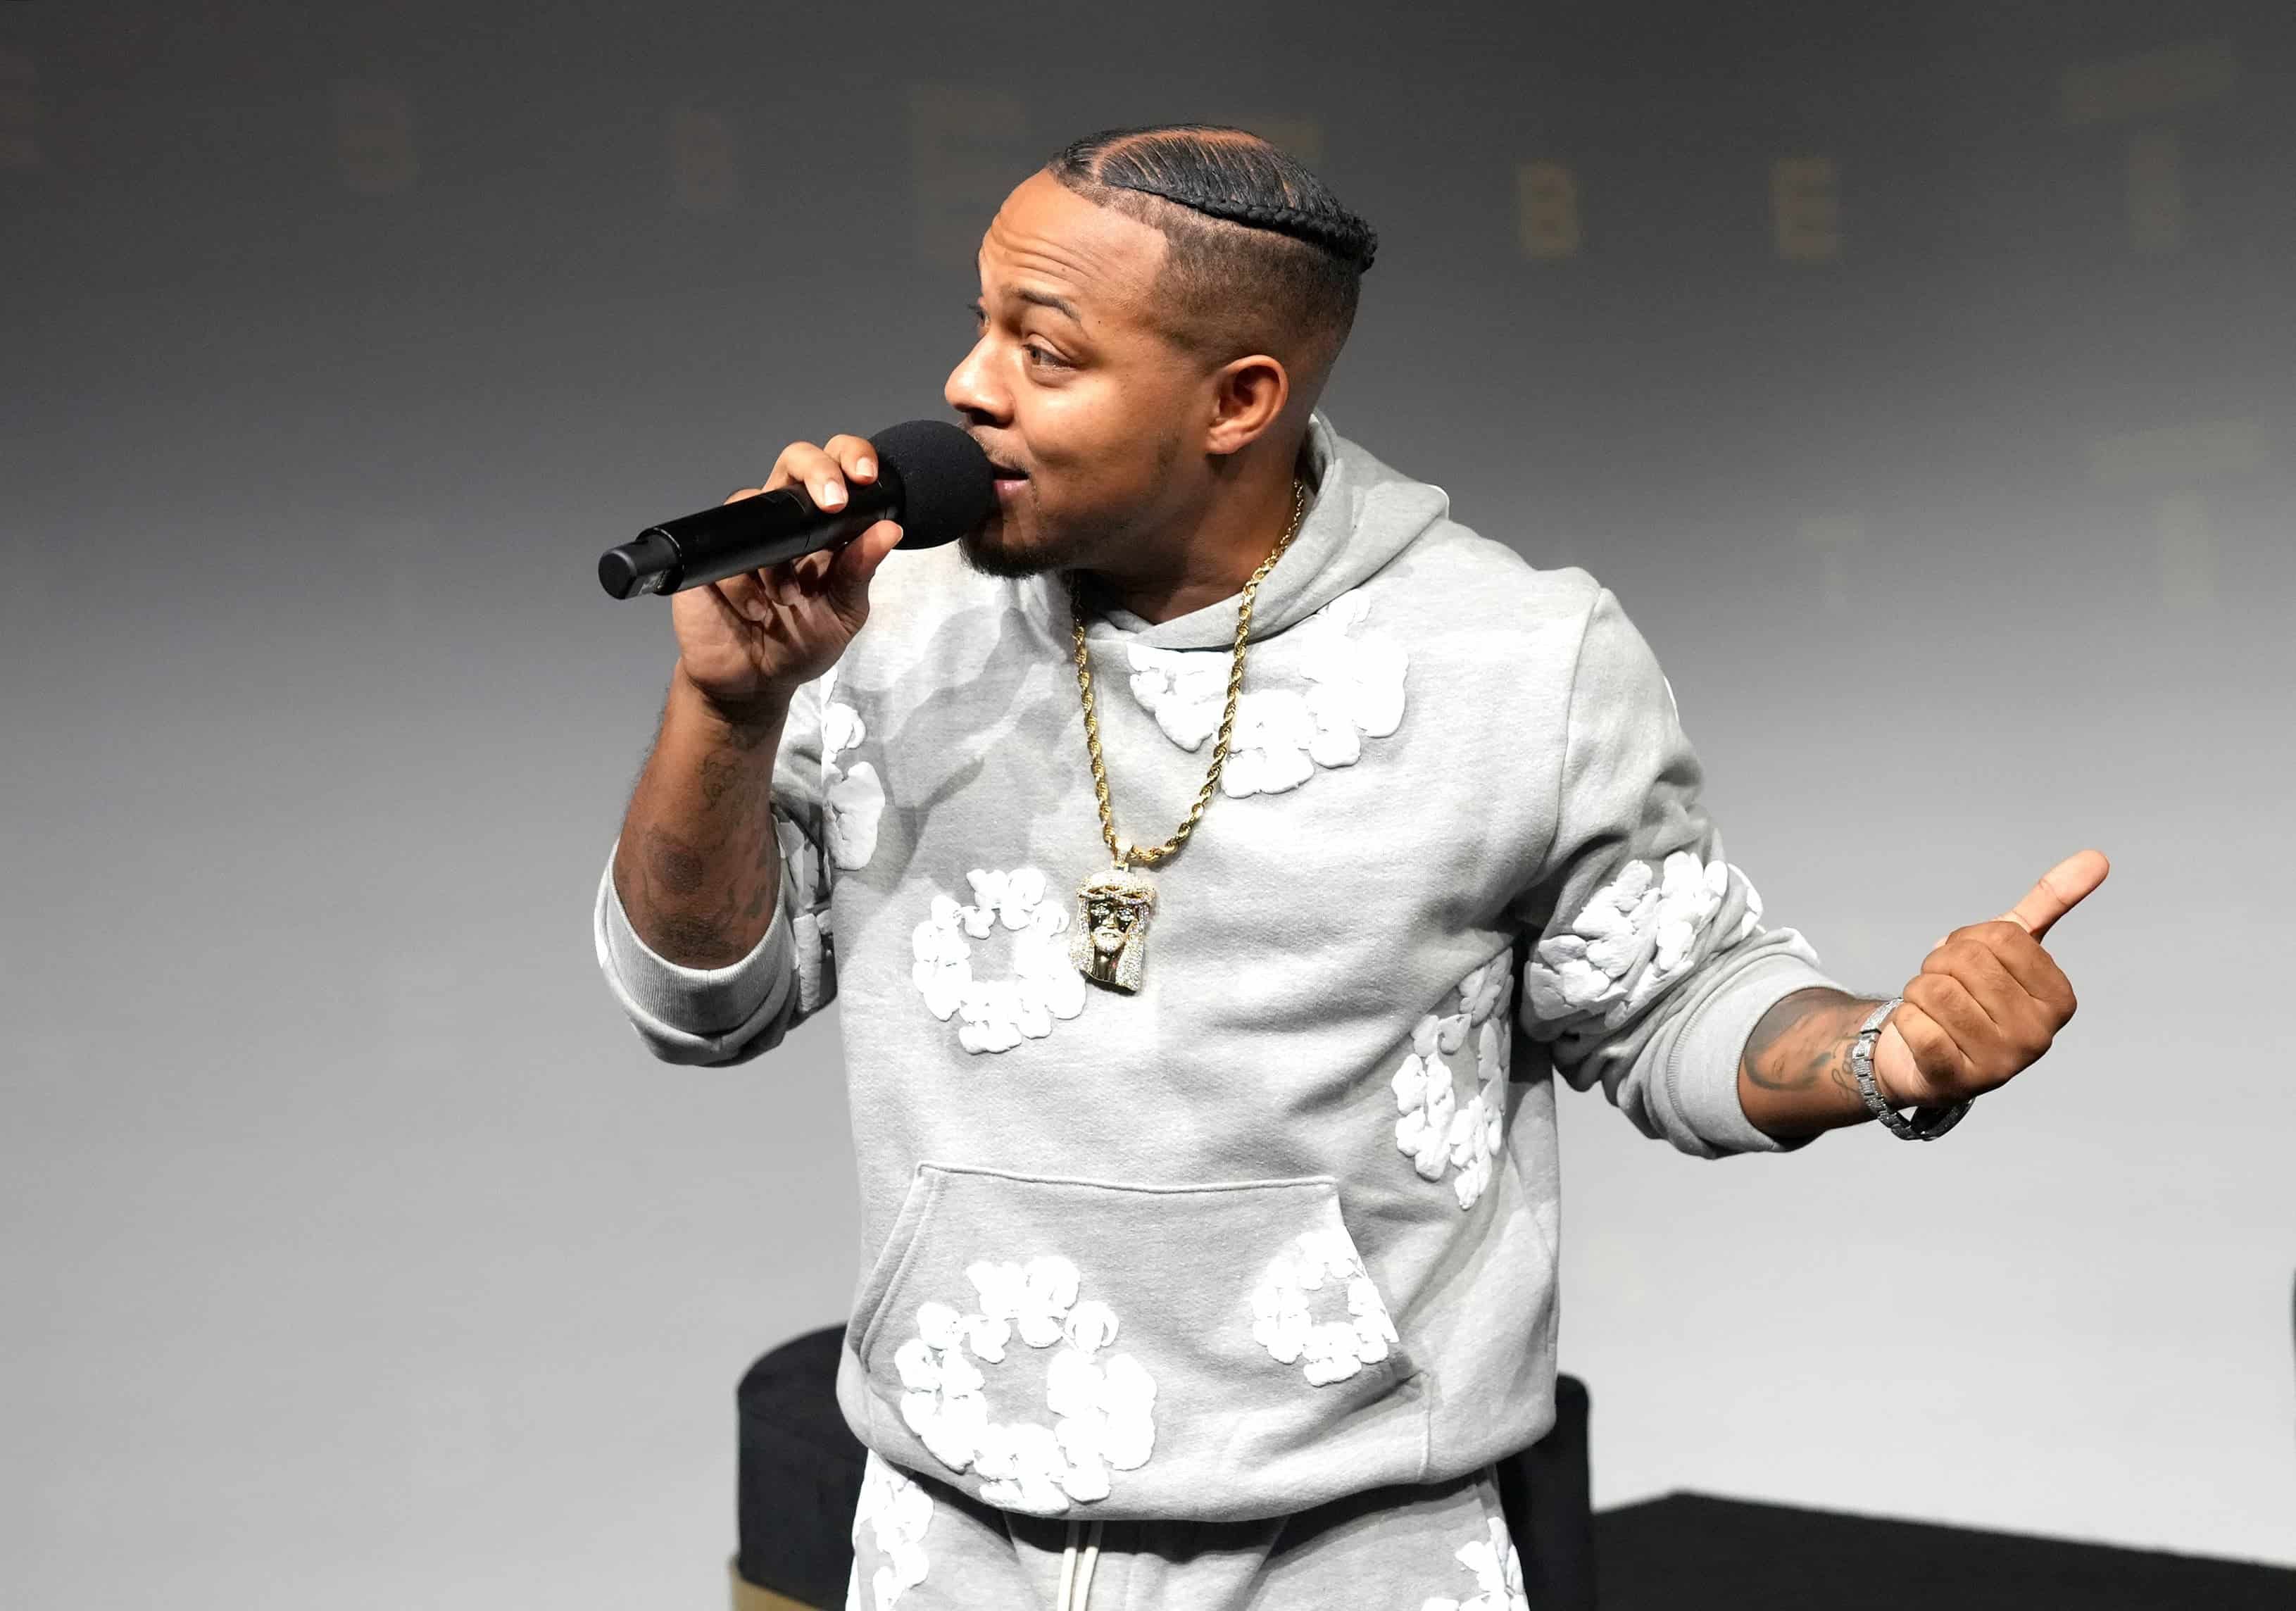 Bow Wow Sued After Allegedly Stealing 10-Year-Old's Money